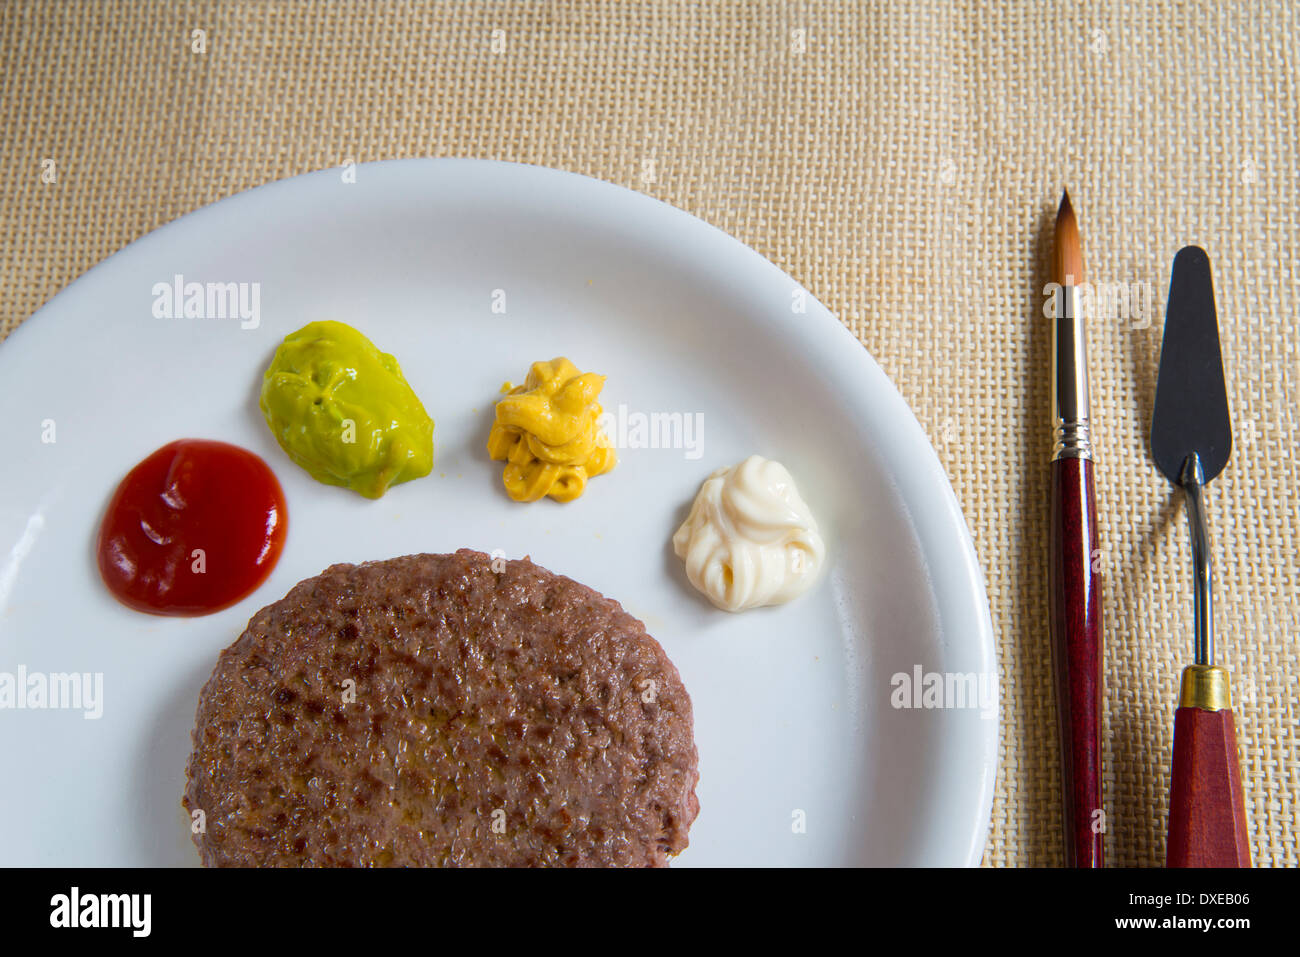 Artistic cuisine: hamburger and palette of assorted sauces, served with paint brush and palette knife as fork and knife. Stock Photo